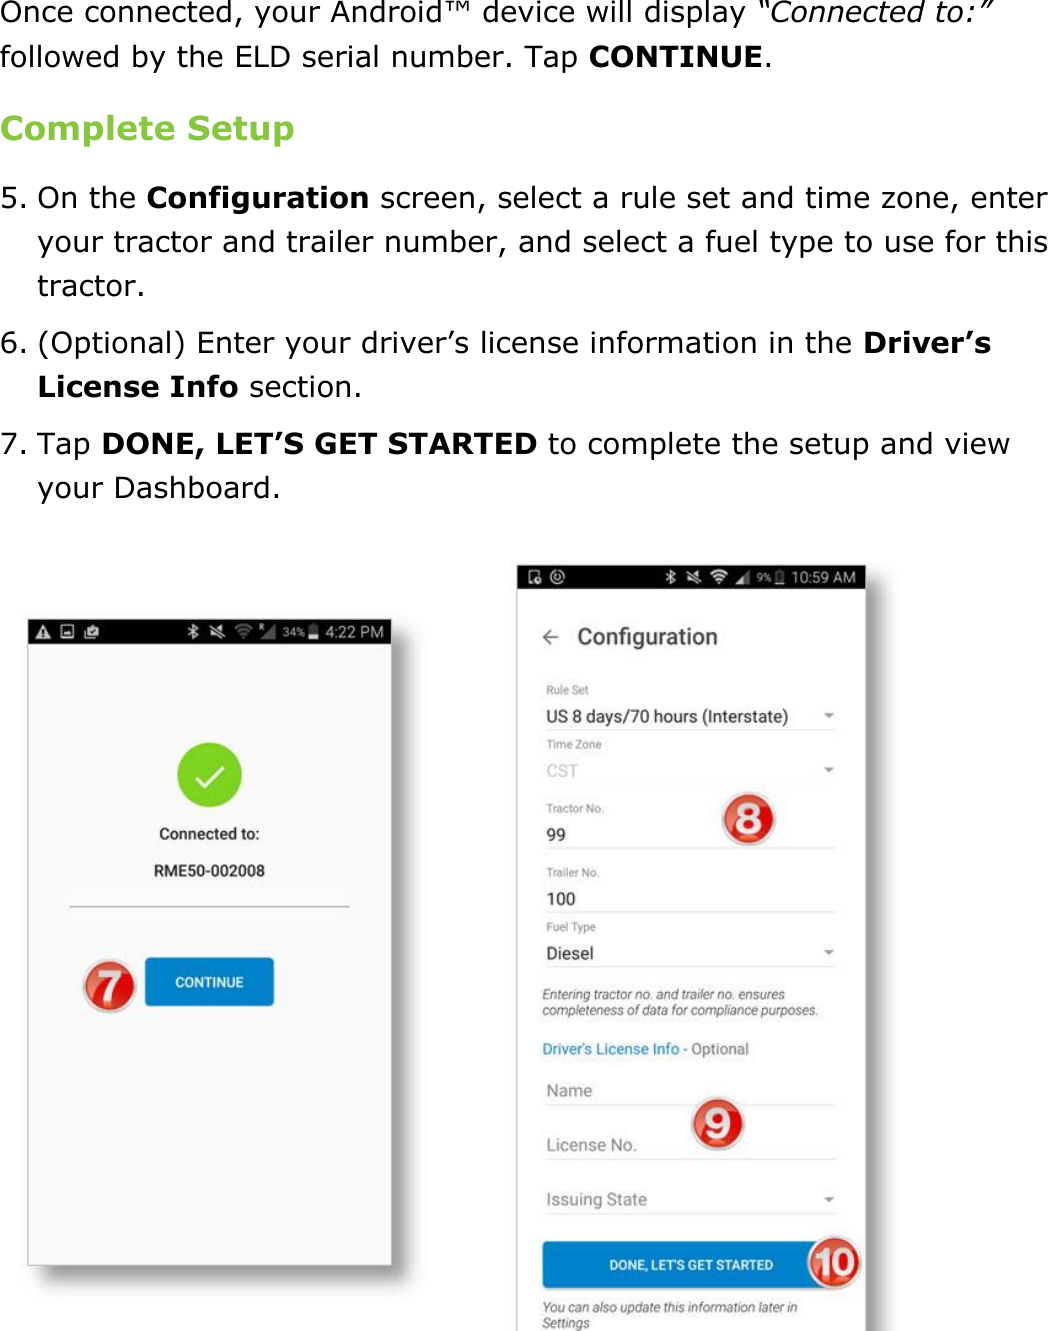 Set My Duty Status DriverConnect User Guide  17 © 2017, Rand McNally, Inc. Once connected, your Android™ device will display “Connected to:” followed by the ELD serial number. Tap CONTINUE. Complete Setup 5. On the Configuration screen, select a rule set and time zone, enter your tractor and trailer number, and select a fuel type to use for this tractor. 6. (Optional) Enter your driver’s license information in the Driver’s License Info section. 7. Tap DONE, LET’S GET STARTED to complete the setup and view your Dashboard.    